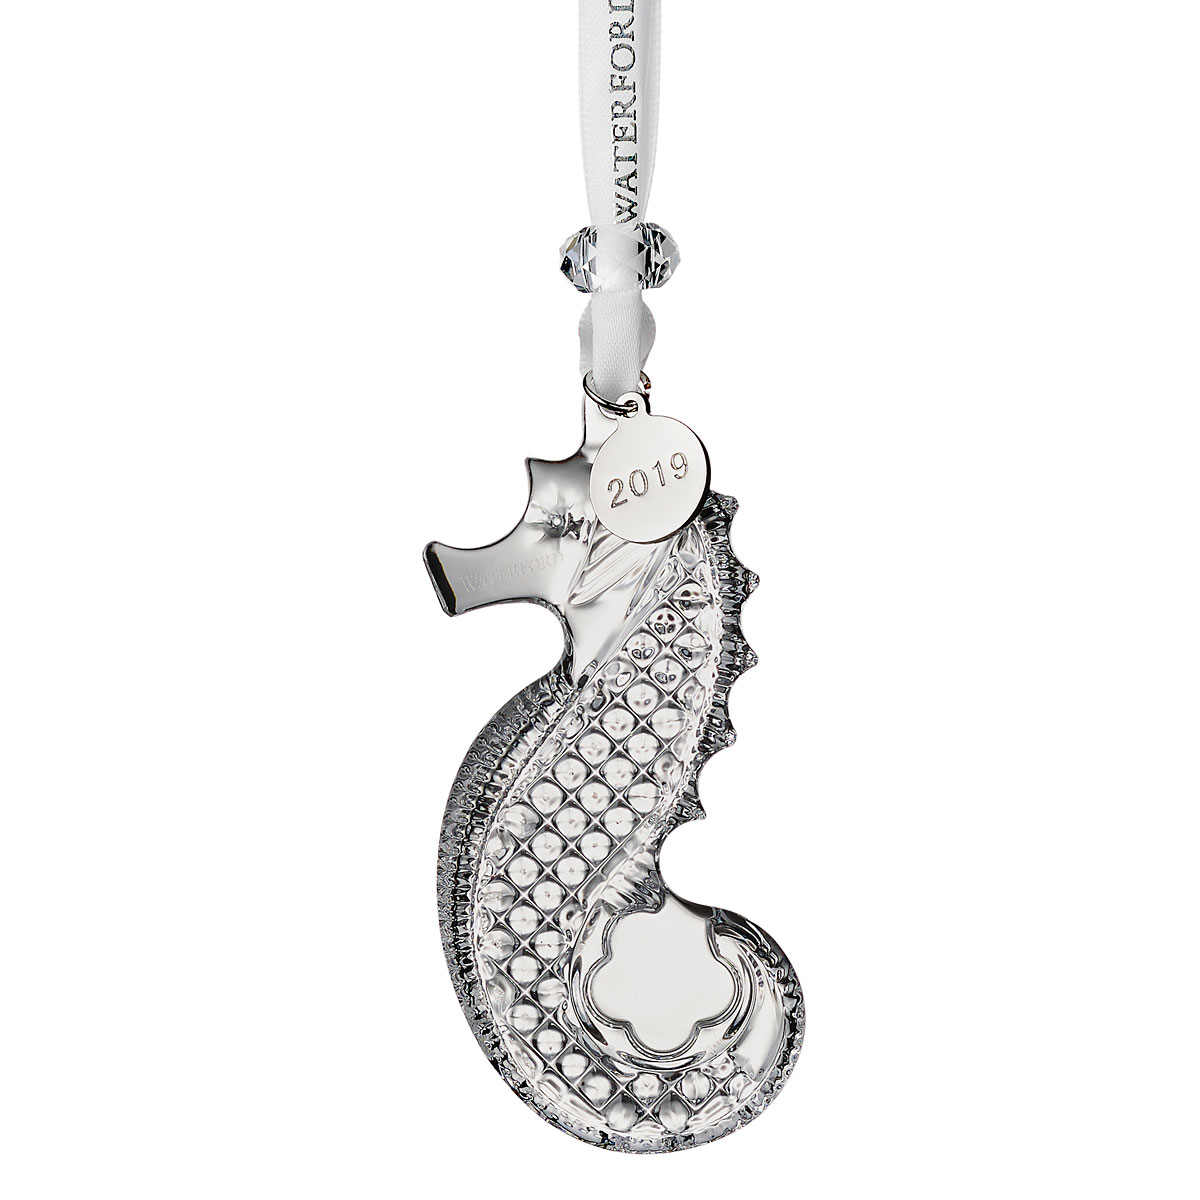 Waterford Crystal 2019 Seahorse Christmas Ornament